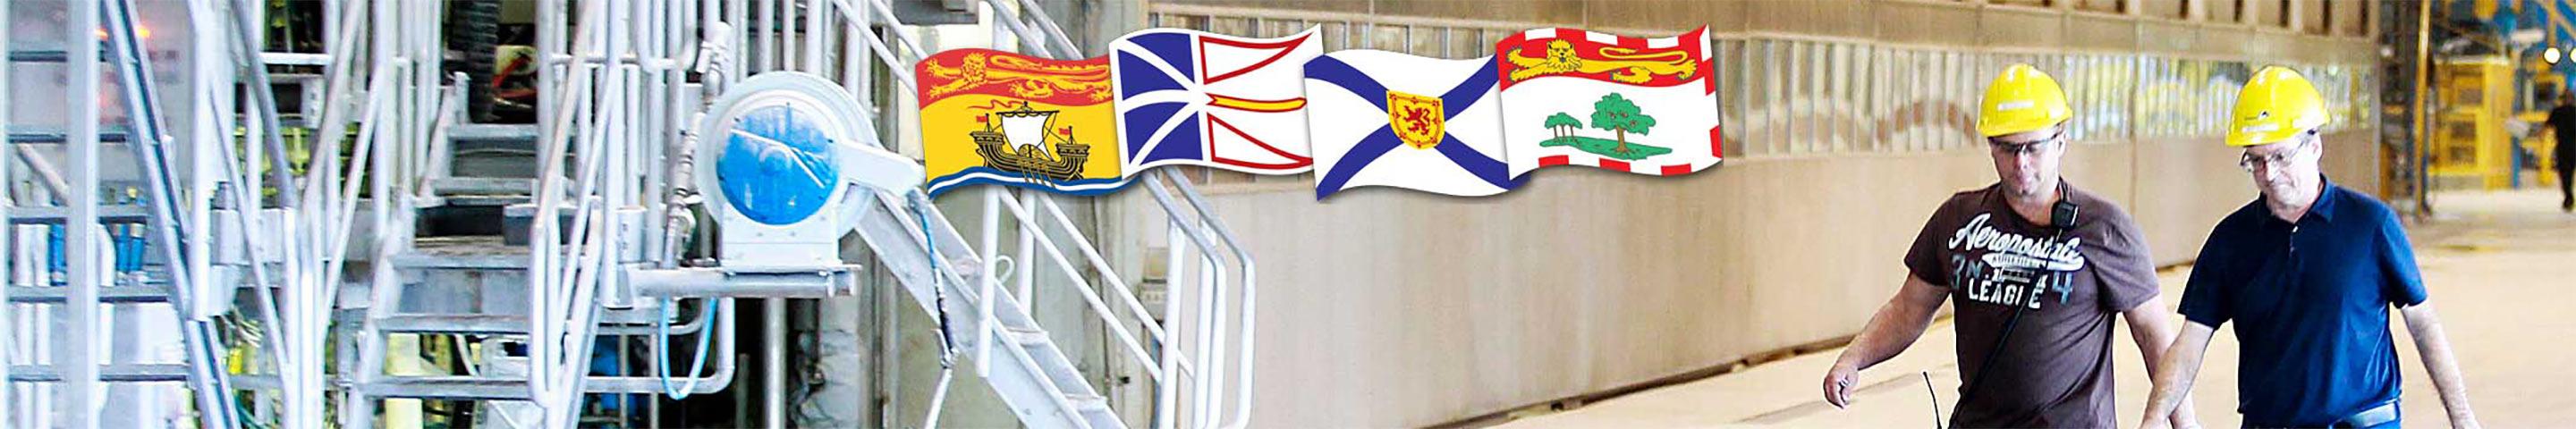 Two men wearing hard hats walking through a building with Nova Scotia flags in the background.